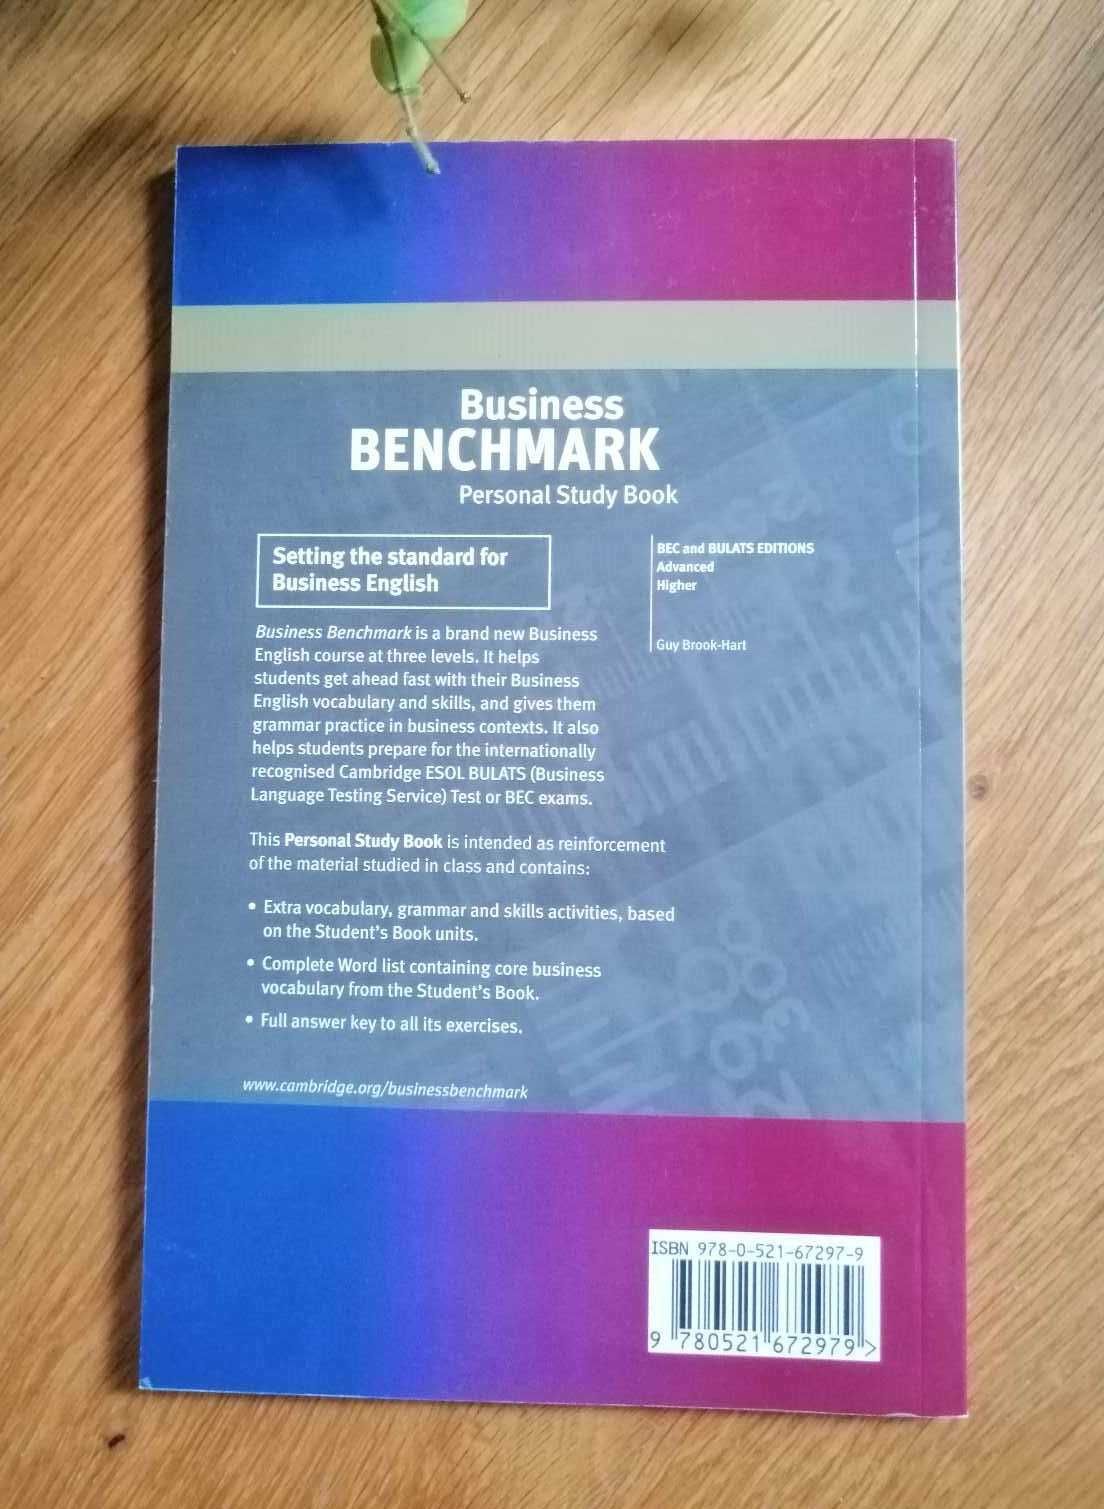 Business Benchmark Advanced Higher, Personal Study Book (2018).